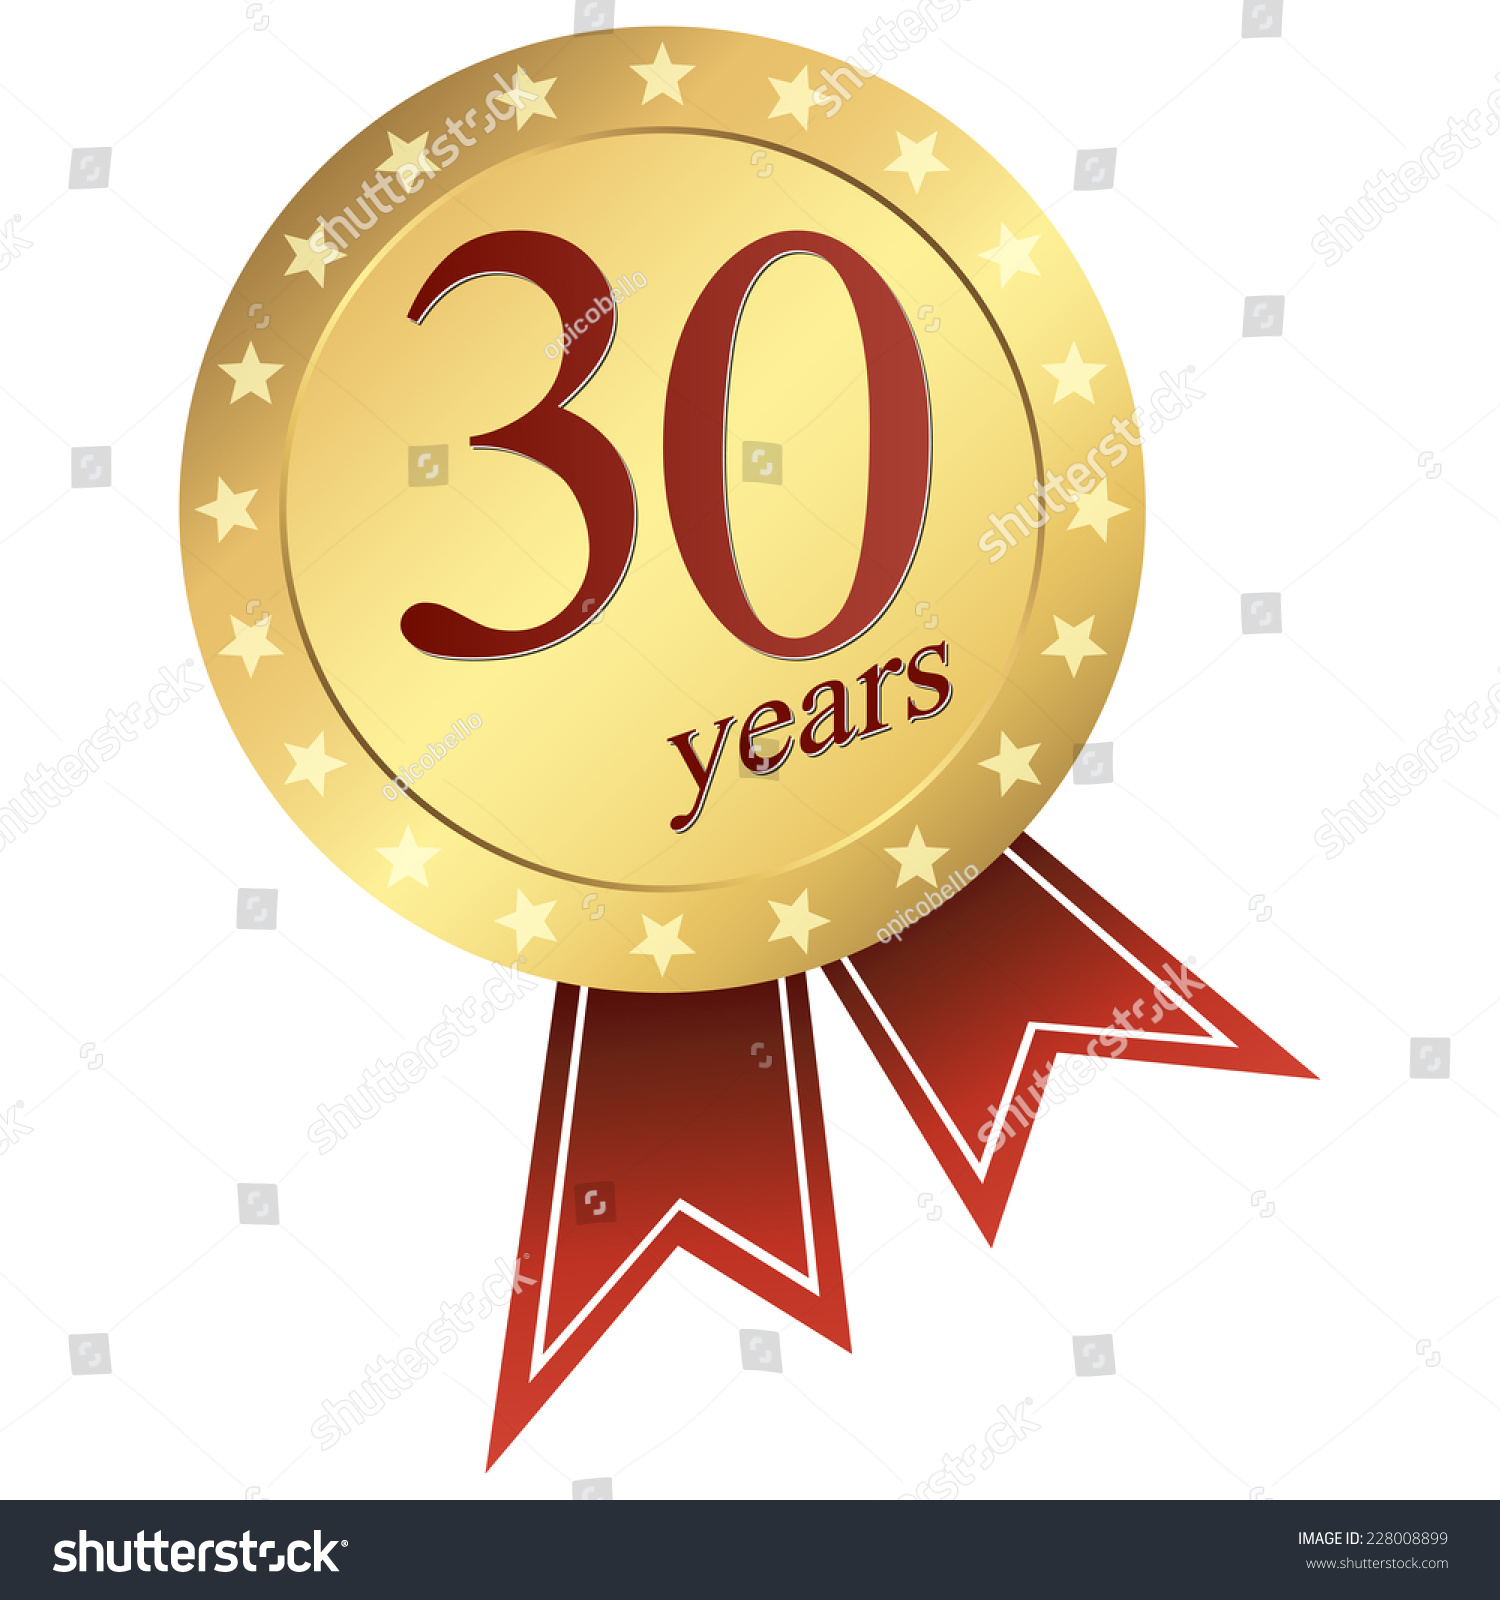 SVG of gold jubilee button 30 years svg